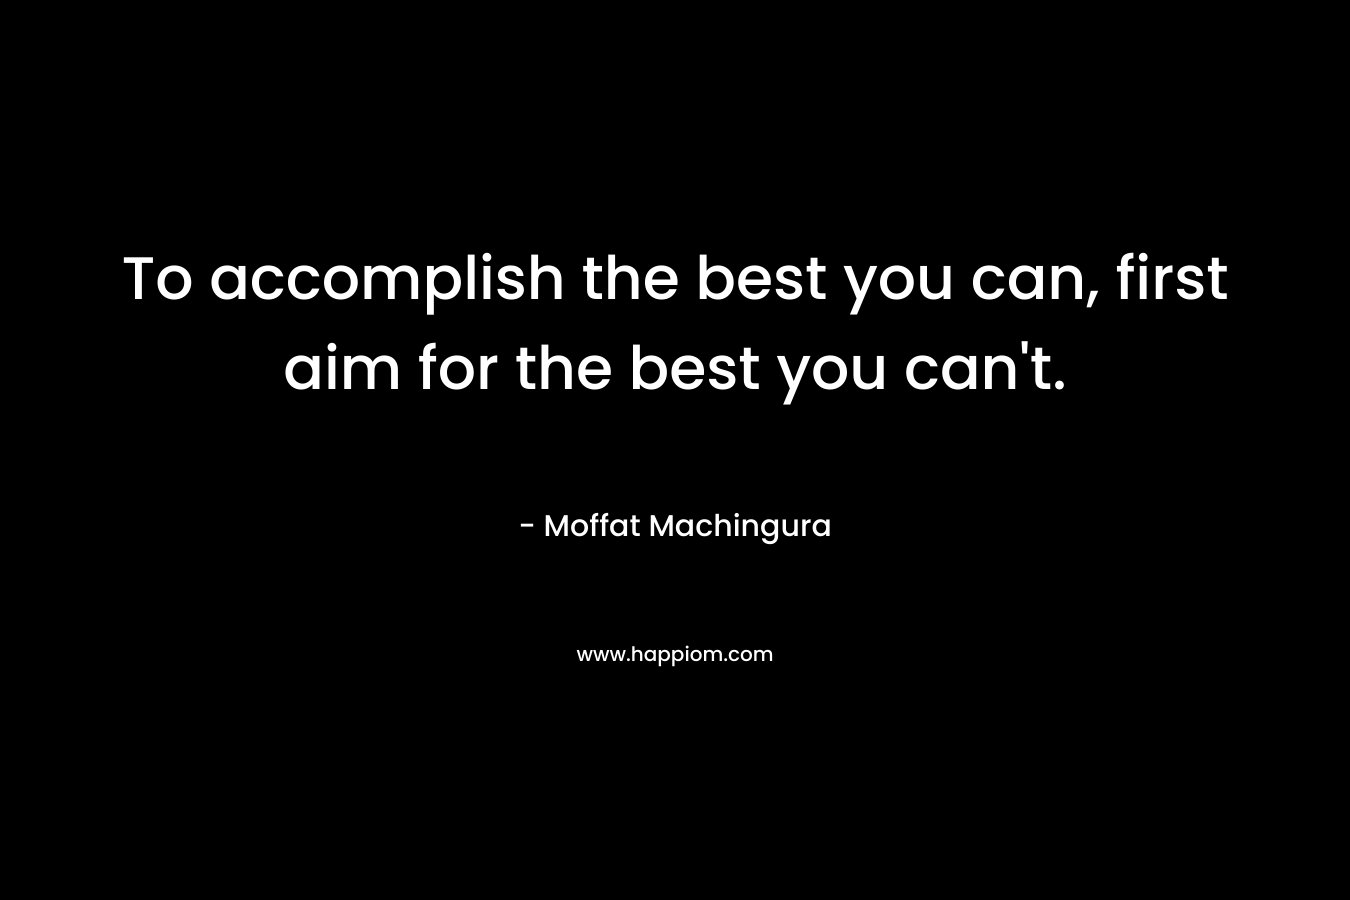 To accomplish the best you can, first aim for the best you can’t. – Moffat Machingura